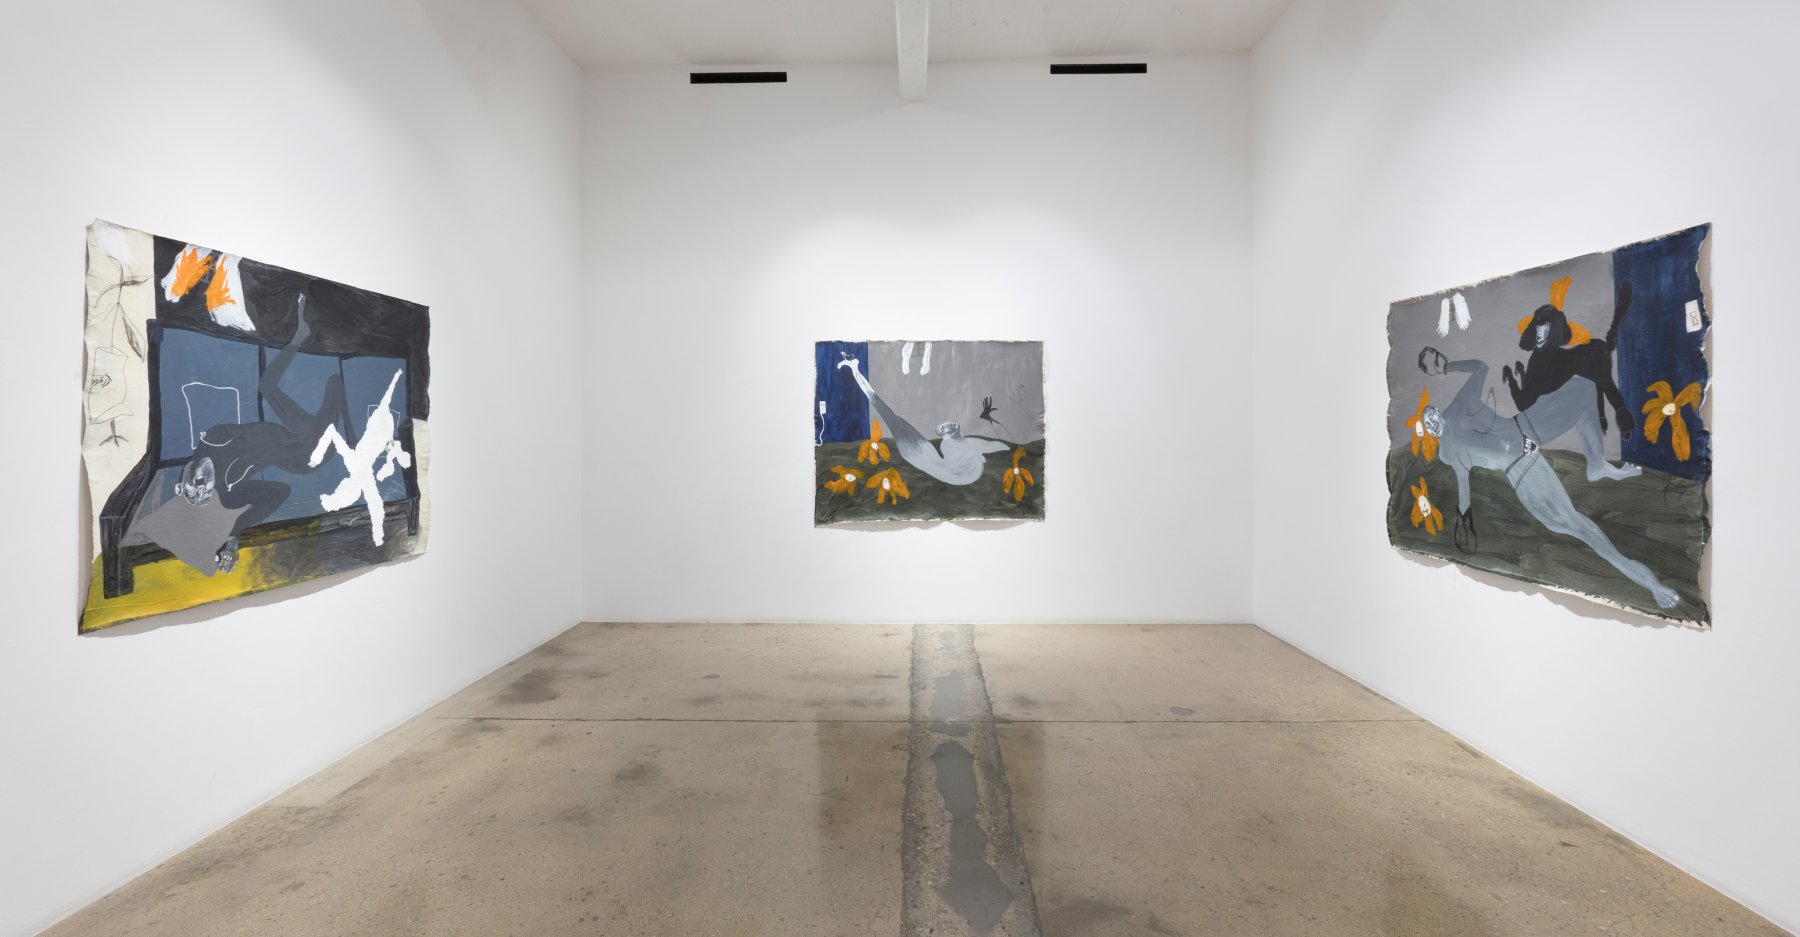 Installation image for Shadi Al-Atallah: Waters That Never Quench, at Steve Turner